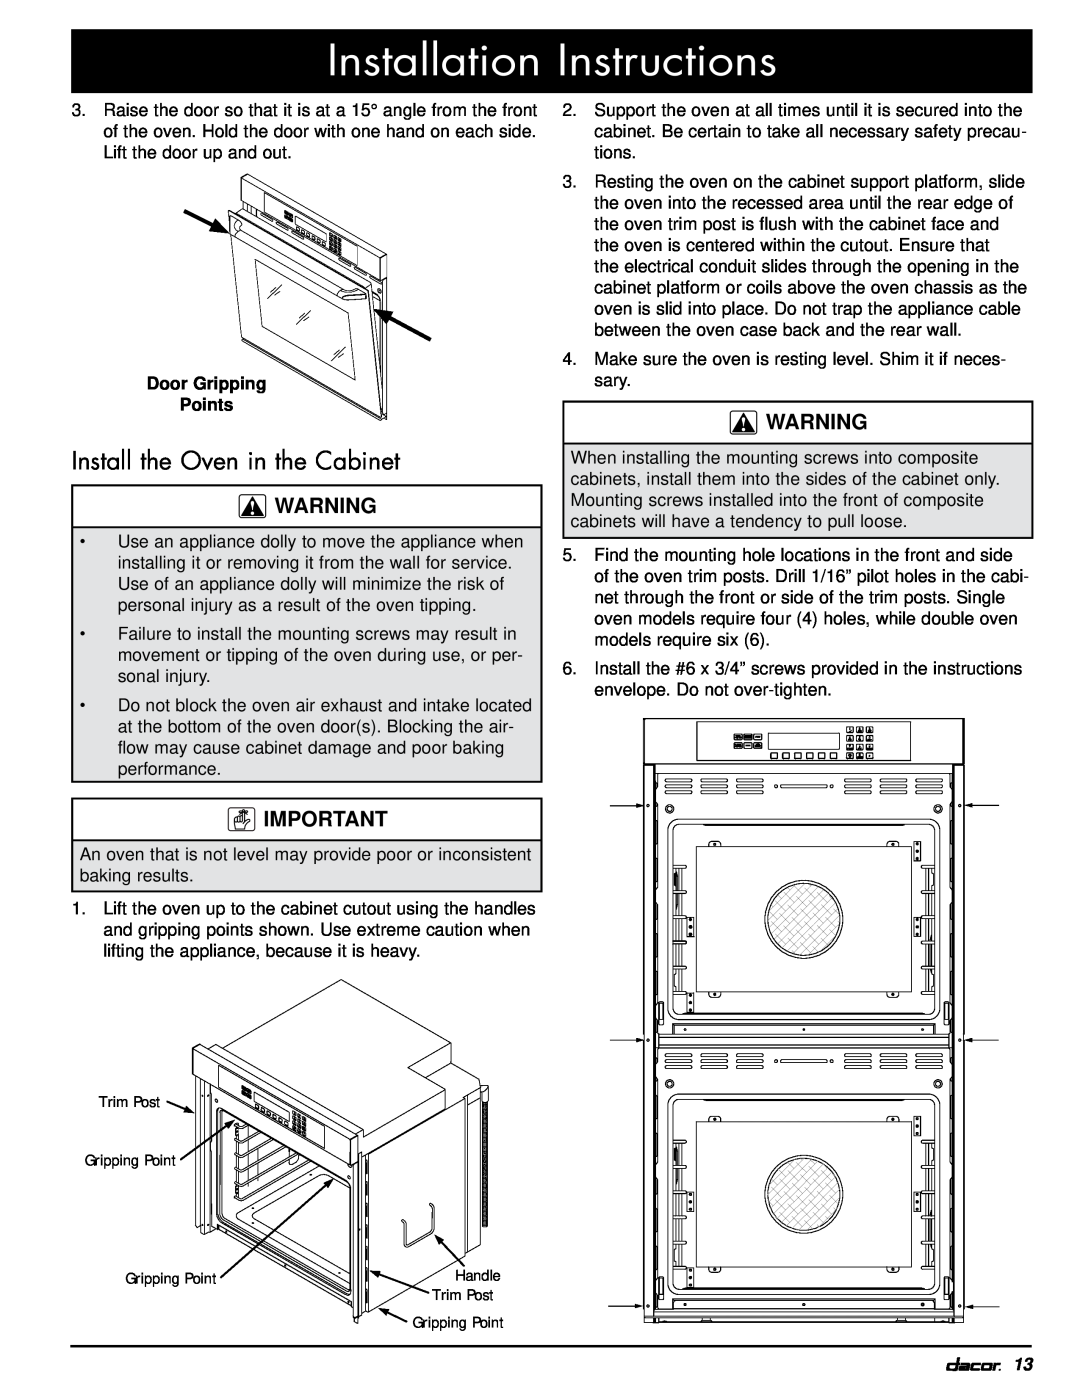 Dacor MOH230, MOV230 Install the Oven in the Cabinet, Installation Instructions, Door Gripping Points 